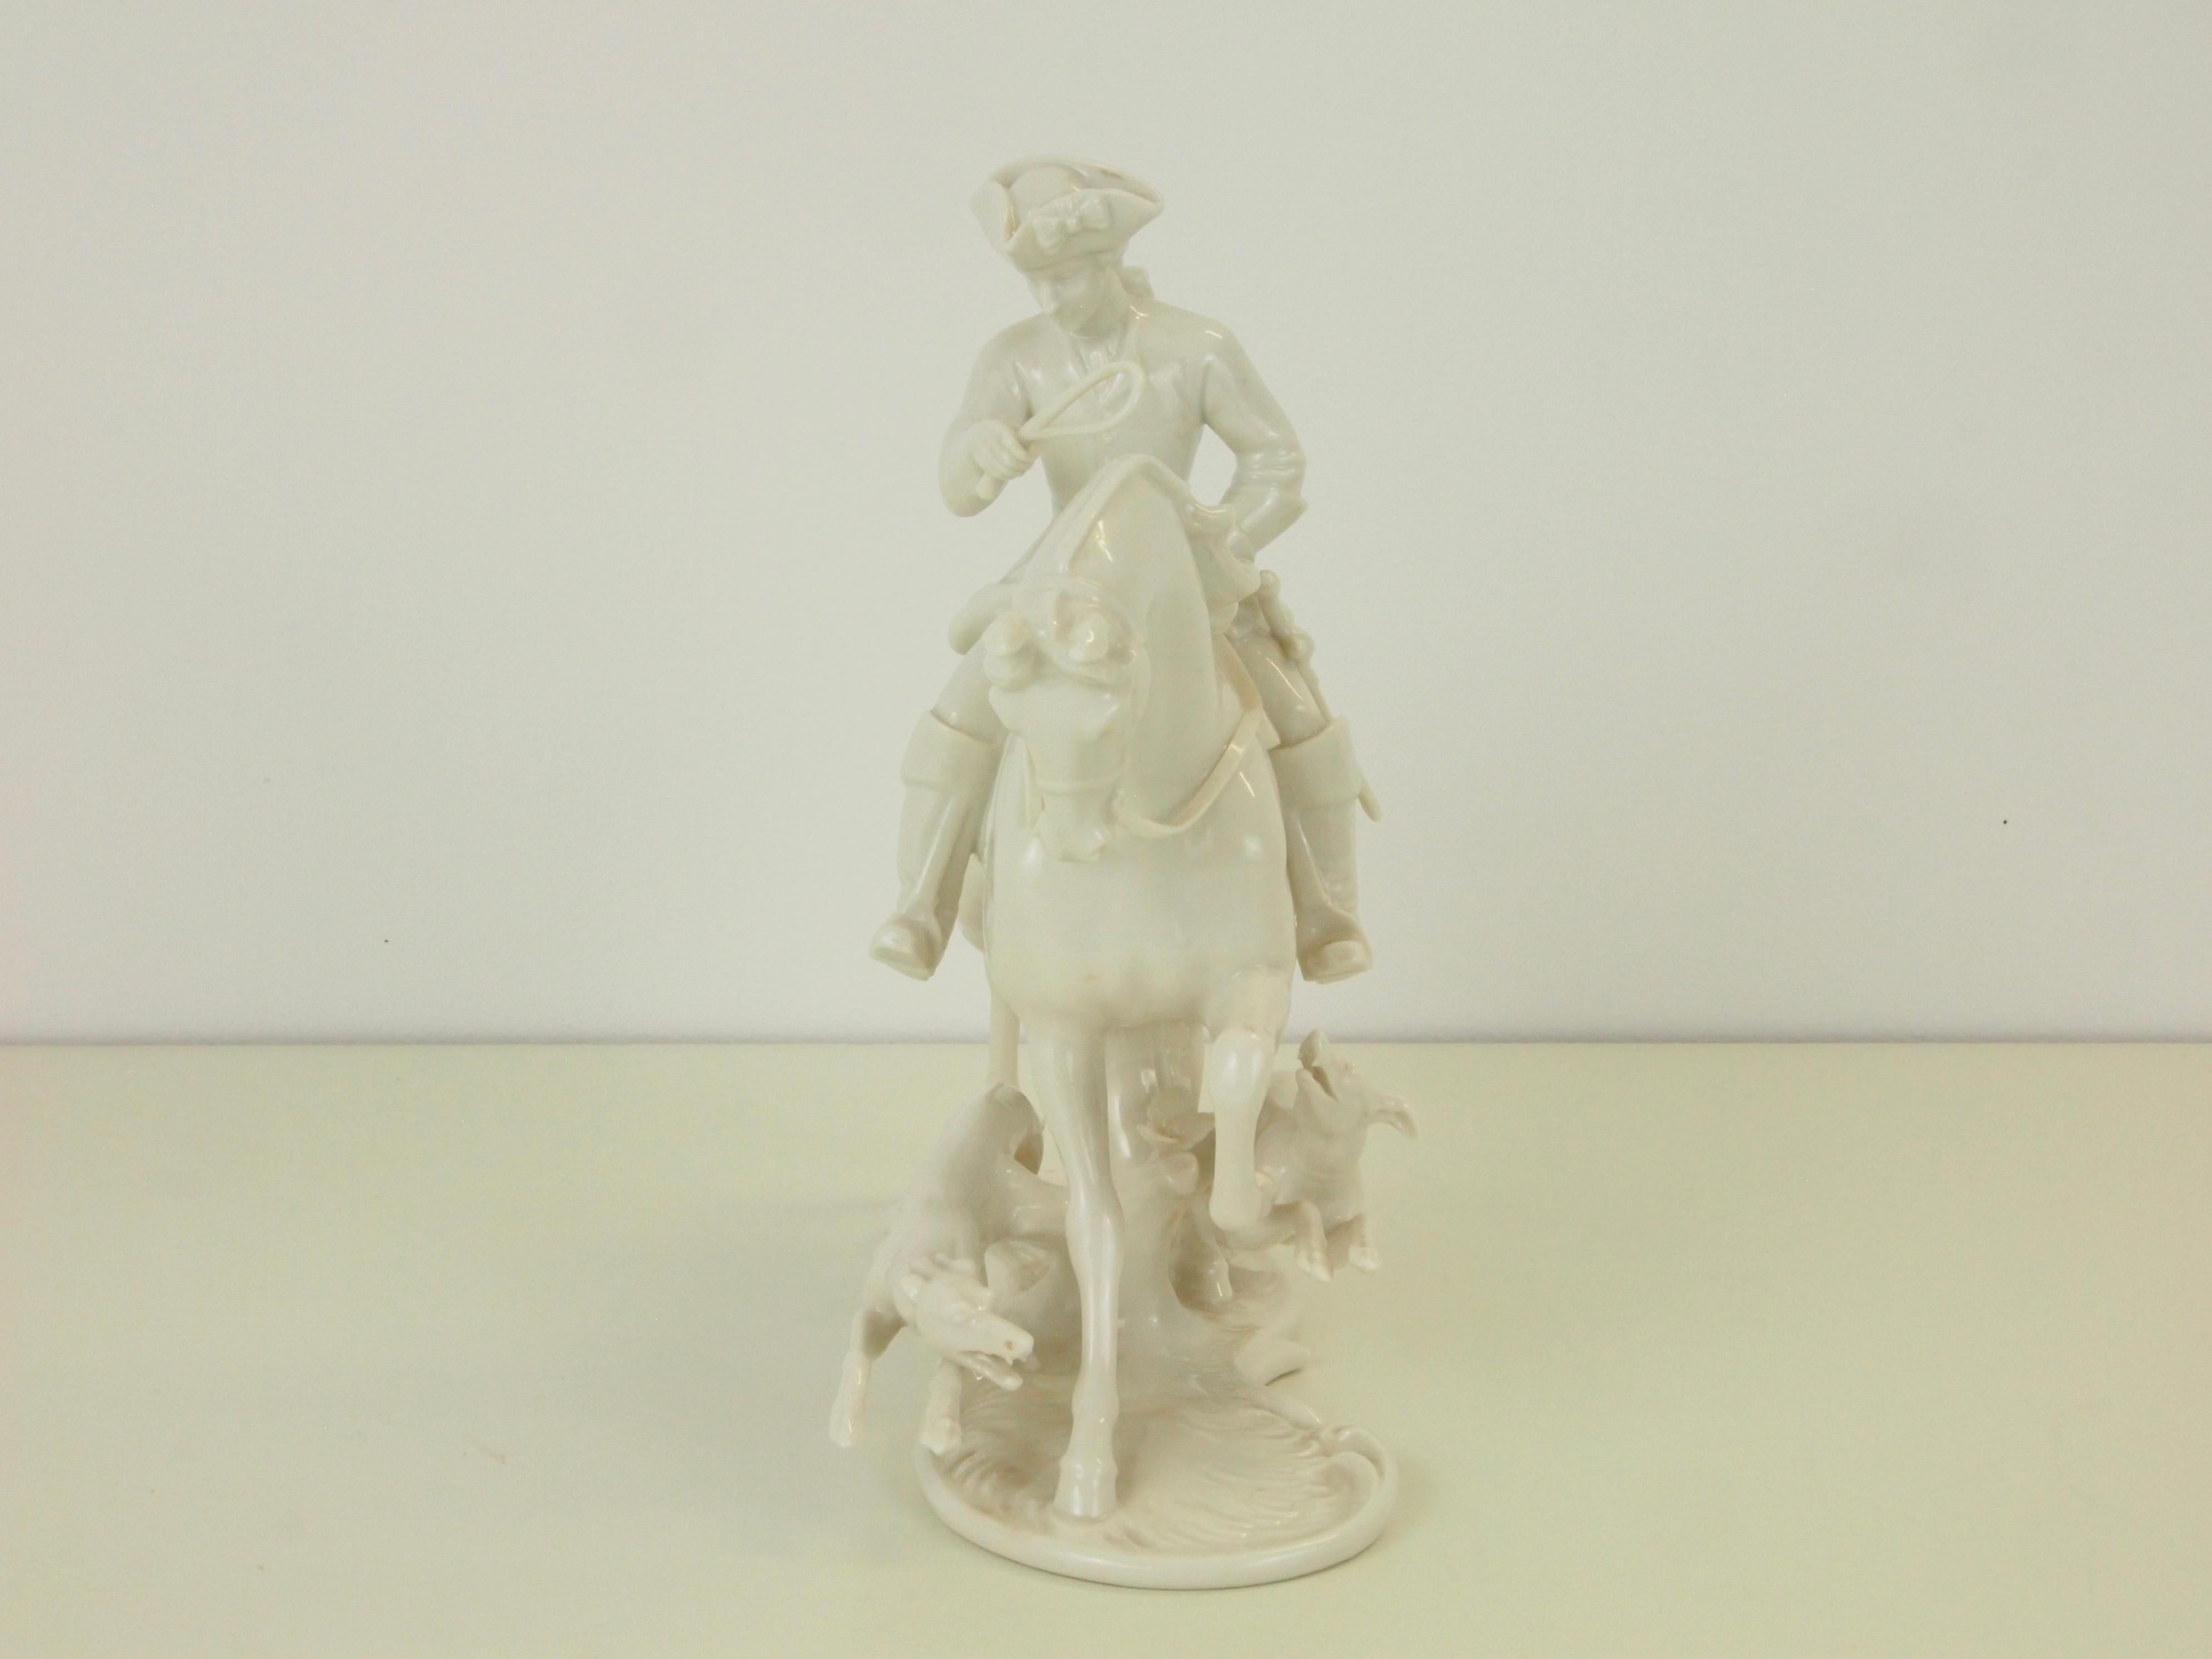 Nymphenburg Porcelain Figurine Depicting a Horse Rider in a Hunting Scene For Sale 11